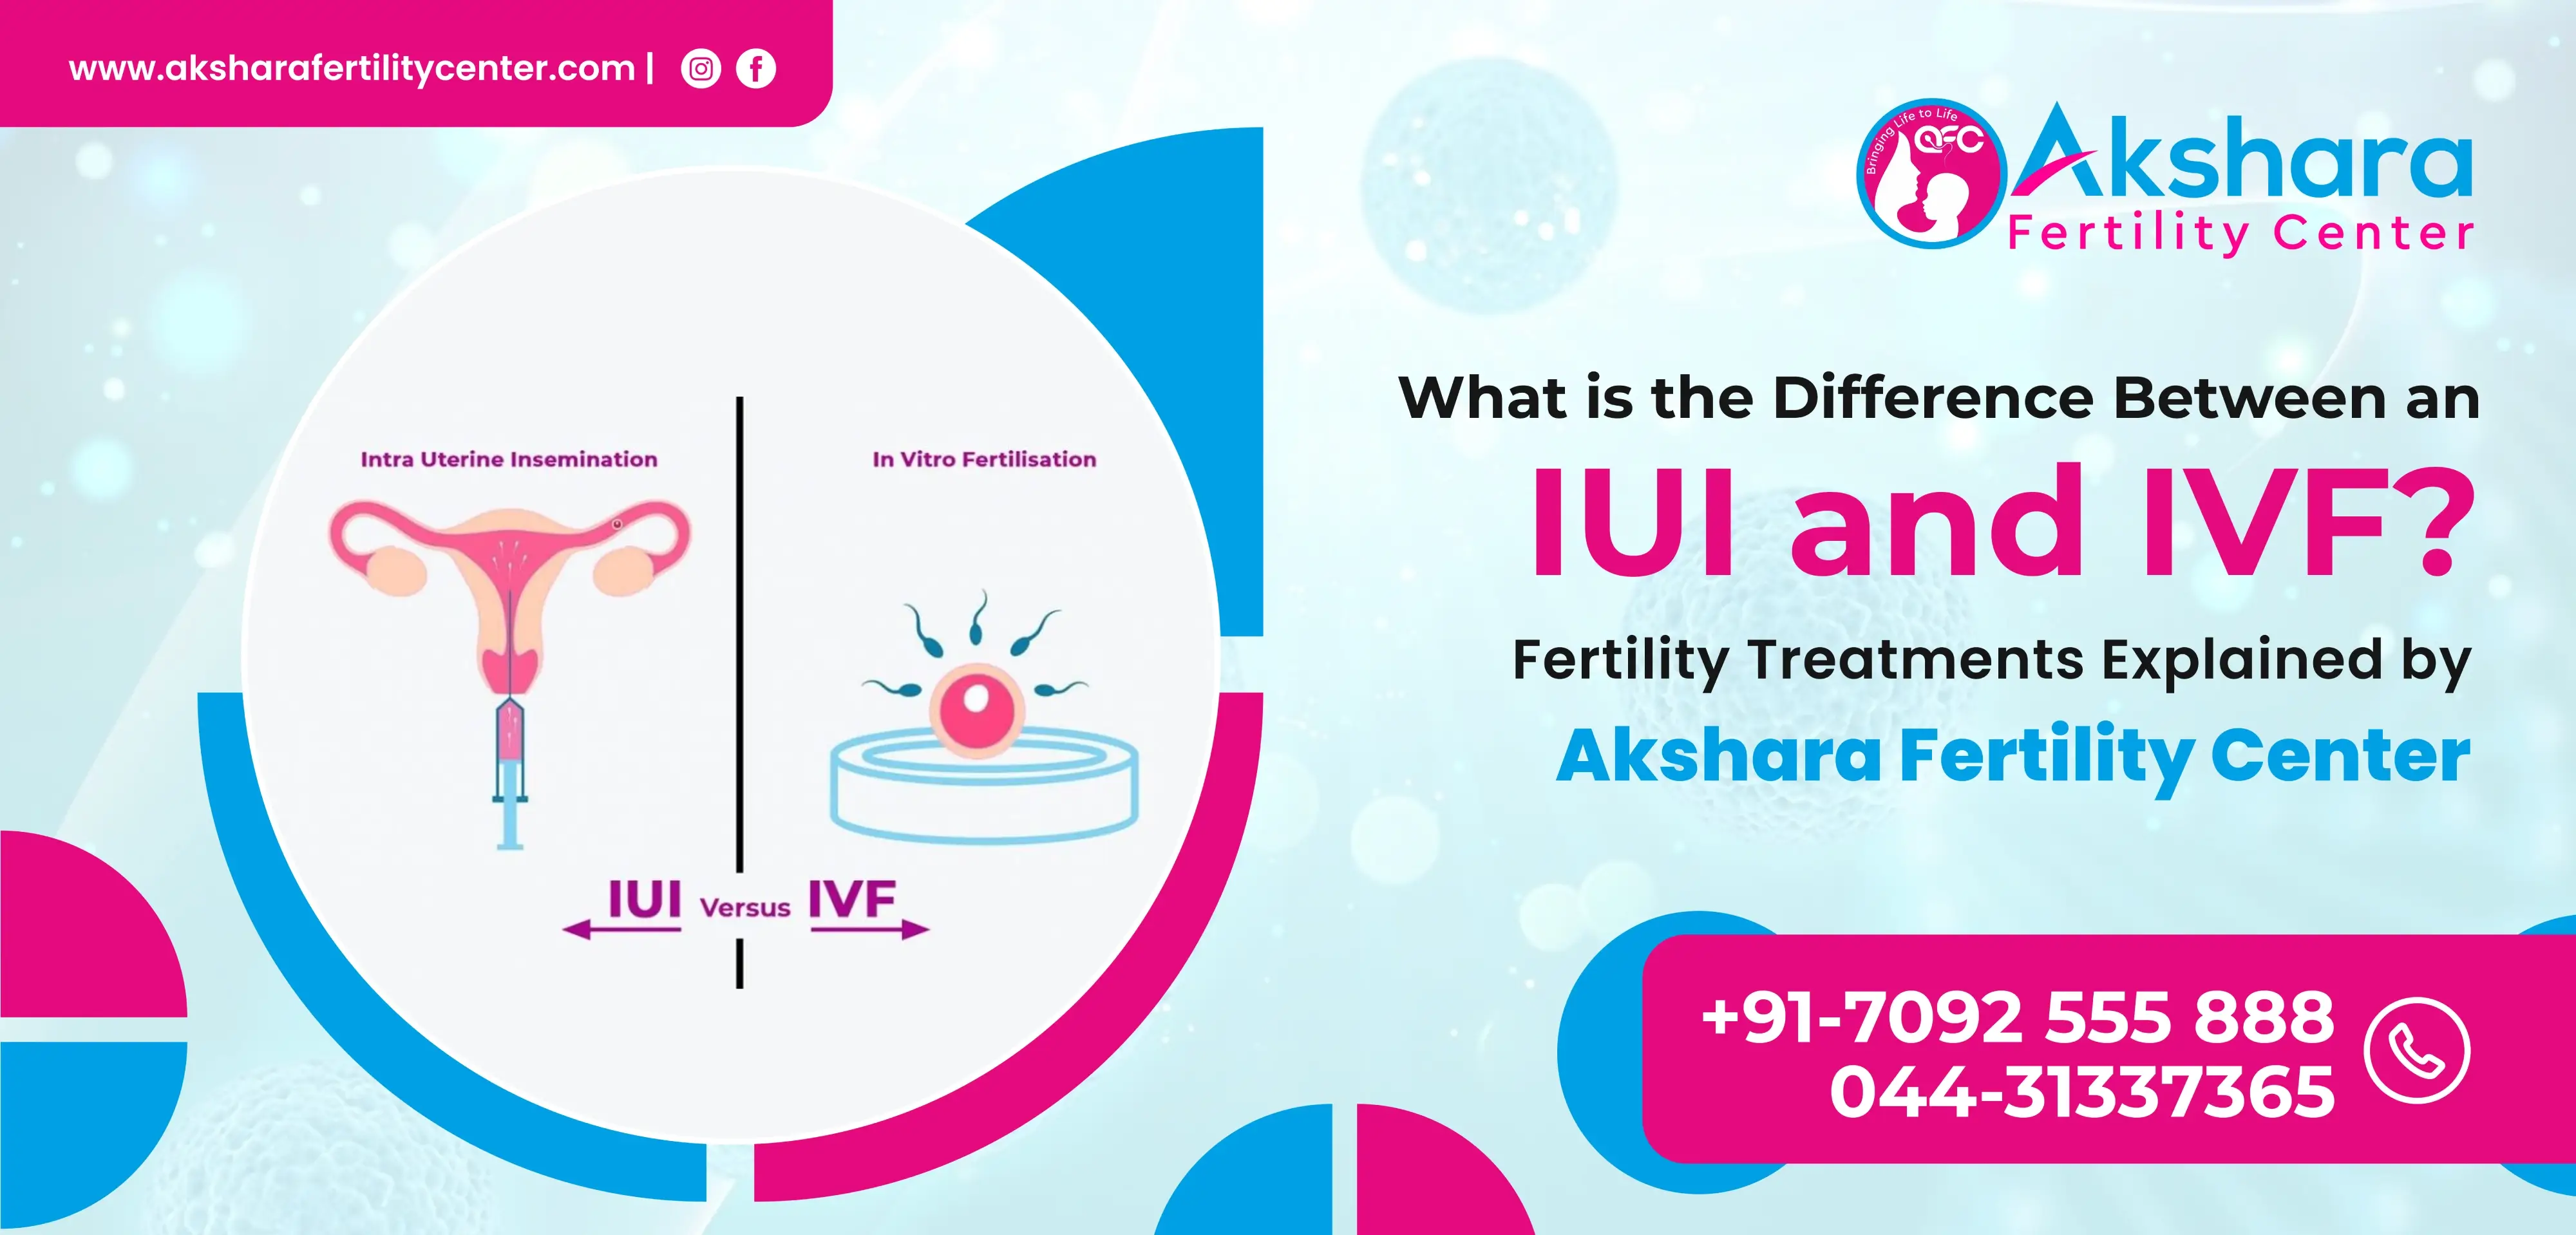 What is the Difference Between an IUI and IVF? Fertility Treatments Explained by Akshara Fertility Center